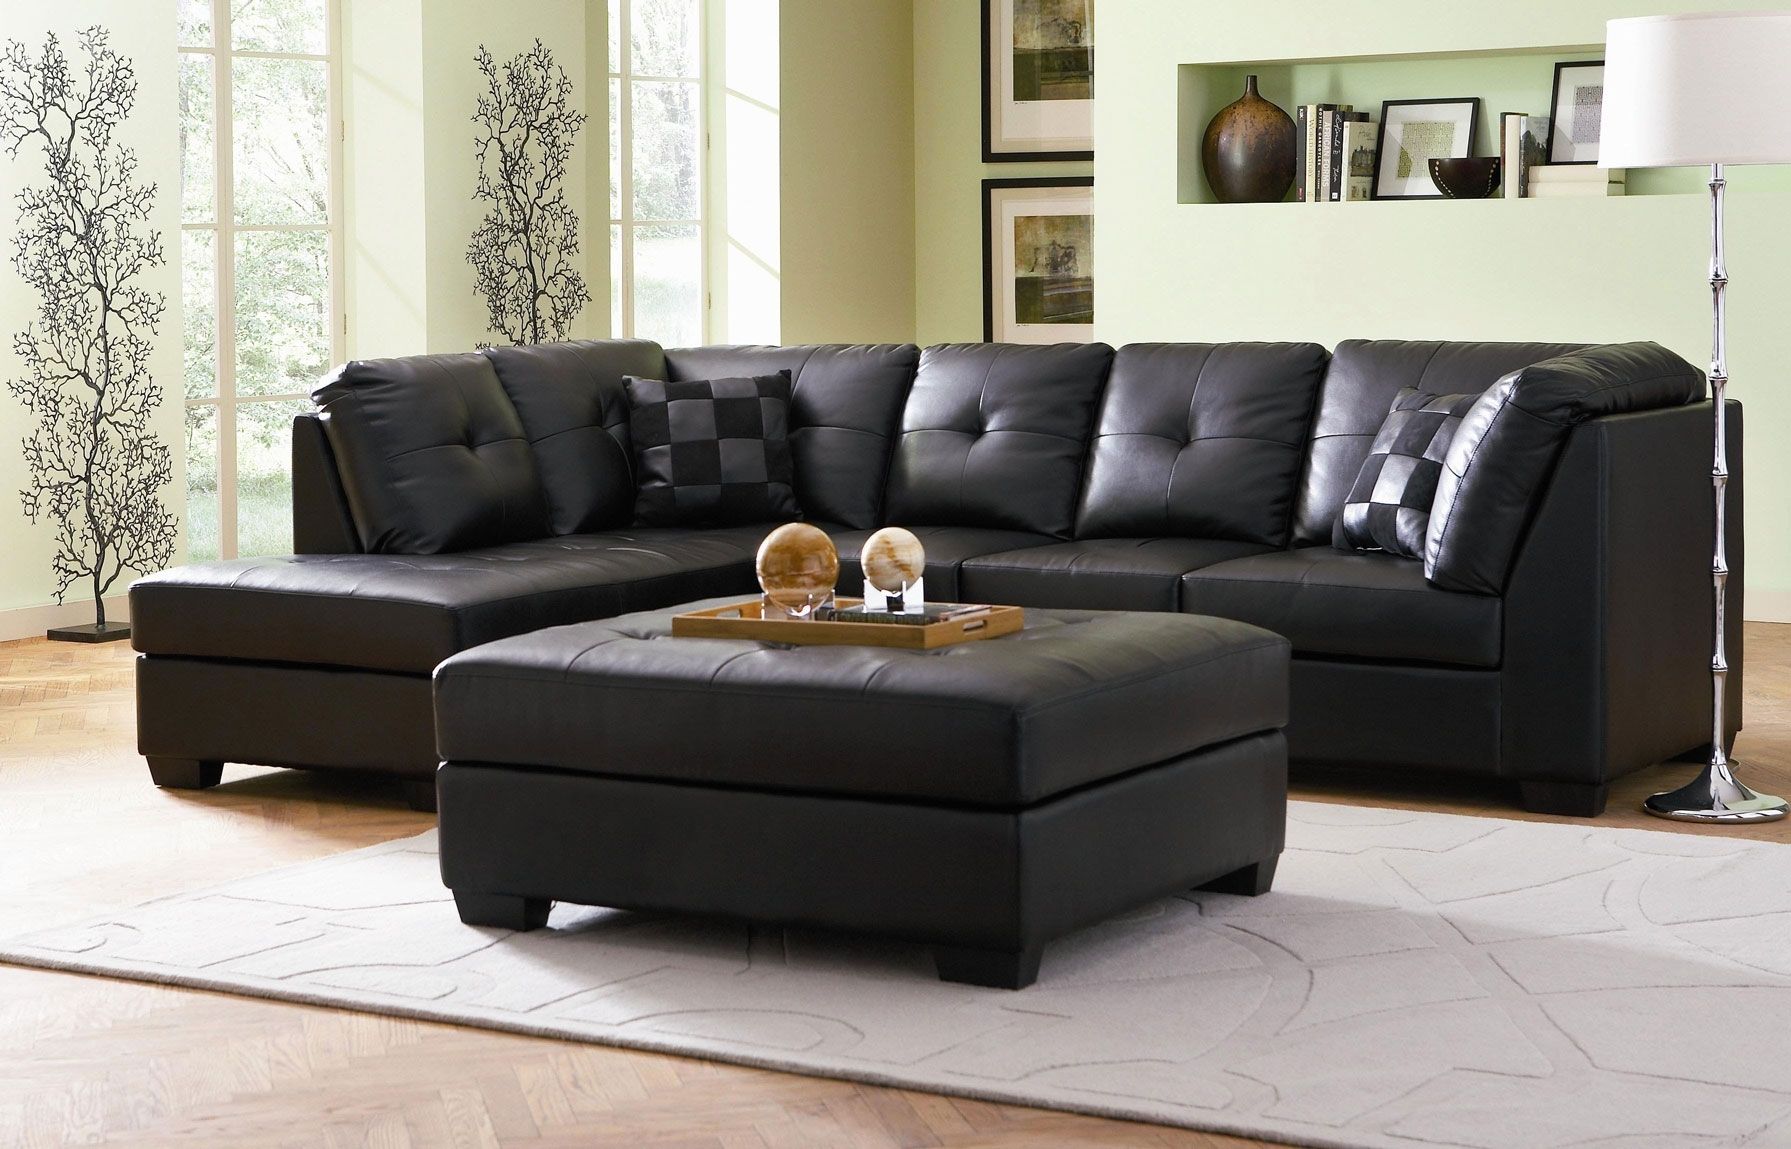 Sectional Sofa. Best Quality Sectional Sofas Jacksonville Fl Within Jacksonville Florida Sectional Sofas (Photo 5 of 10)